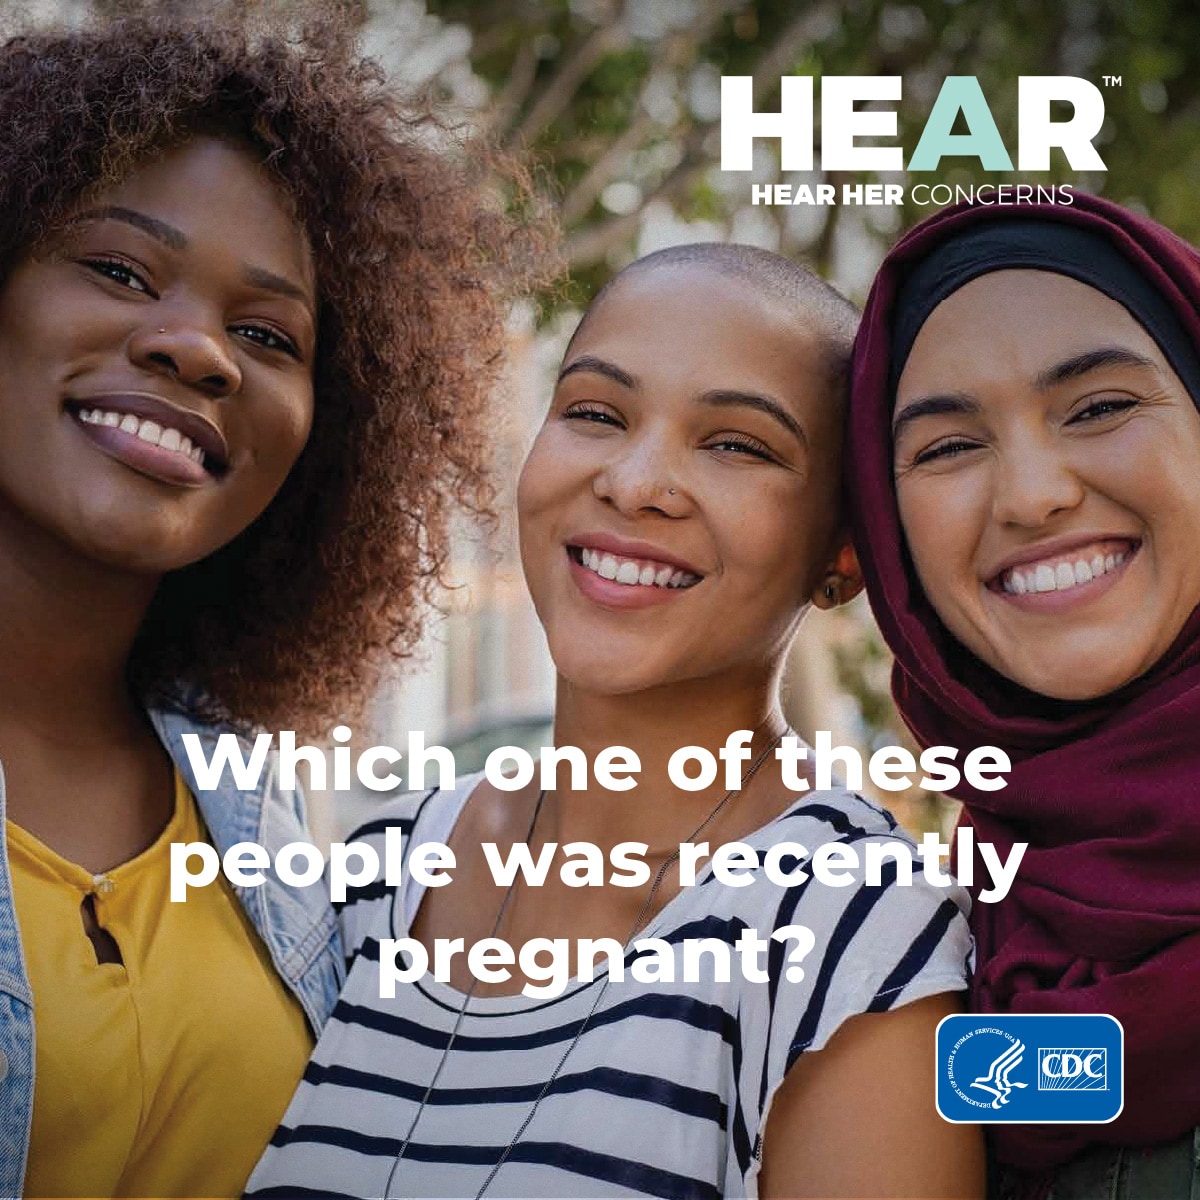 Hear Her Concerns. Which one of these people was recently pregnant?